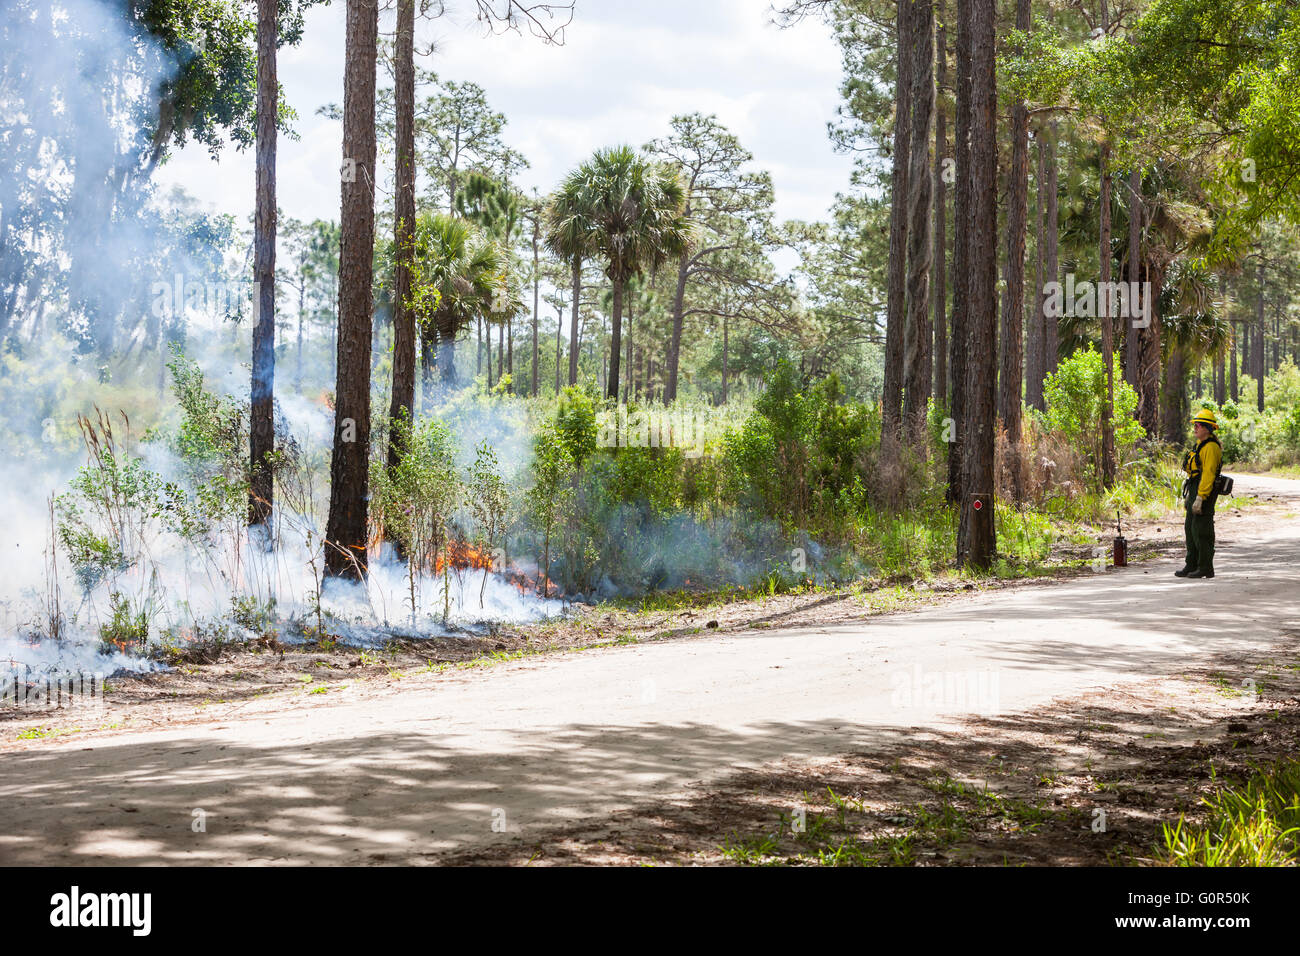 Florida Park Service staff execute a prescribed burn in the pine flatwoods of Highlands Hammock State Park in Sebring, Florida. Stock Photo